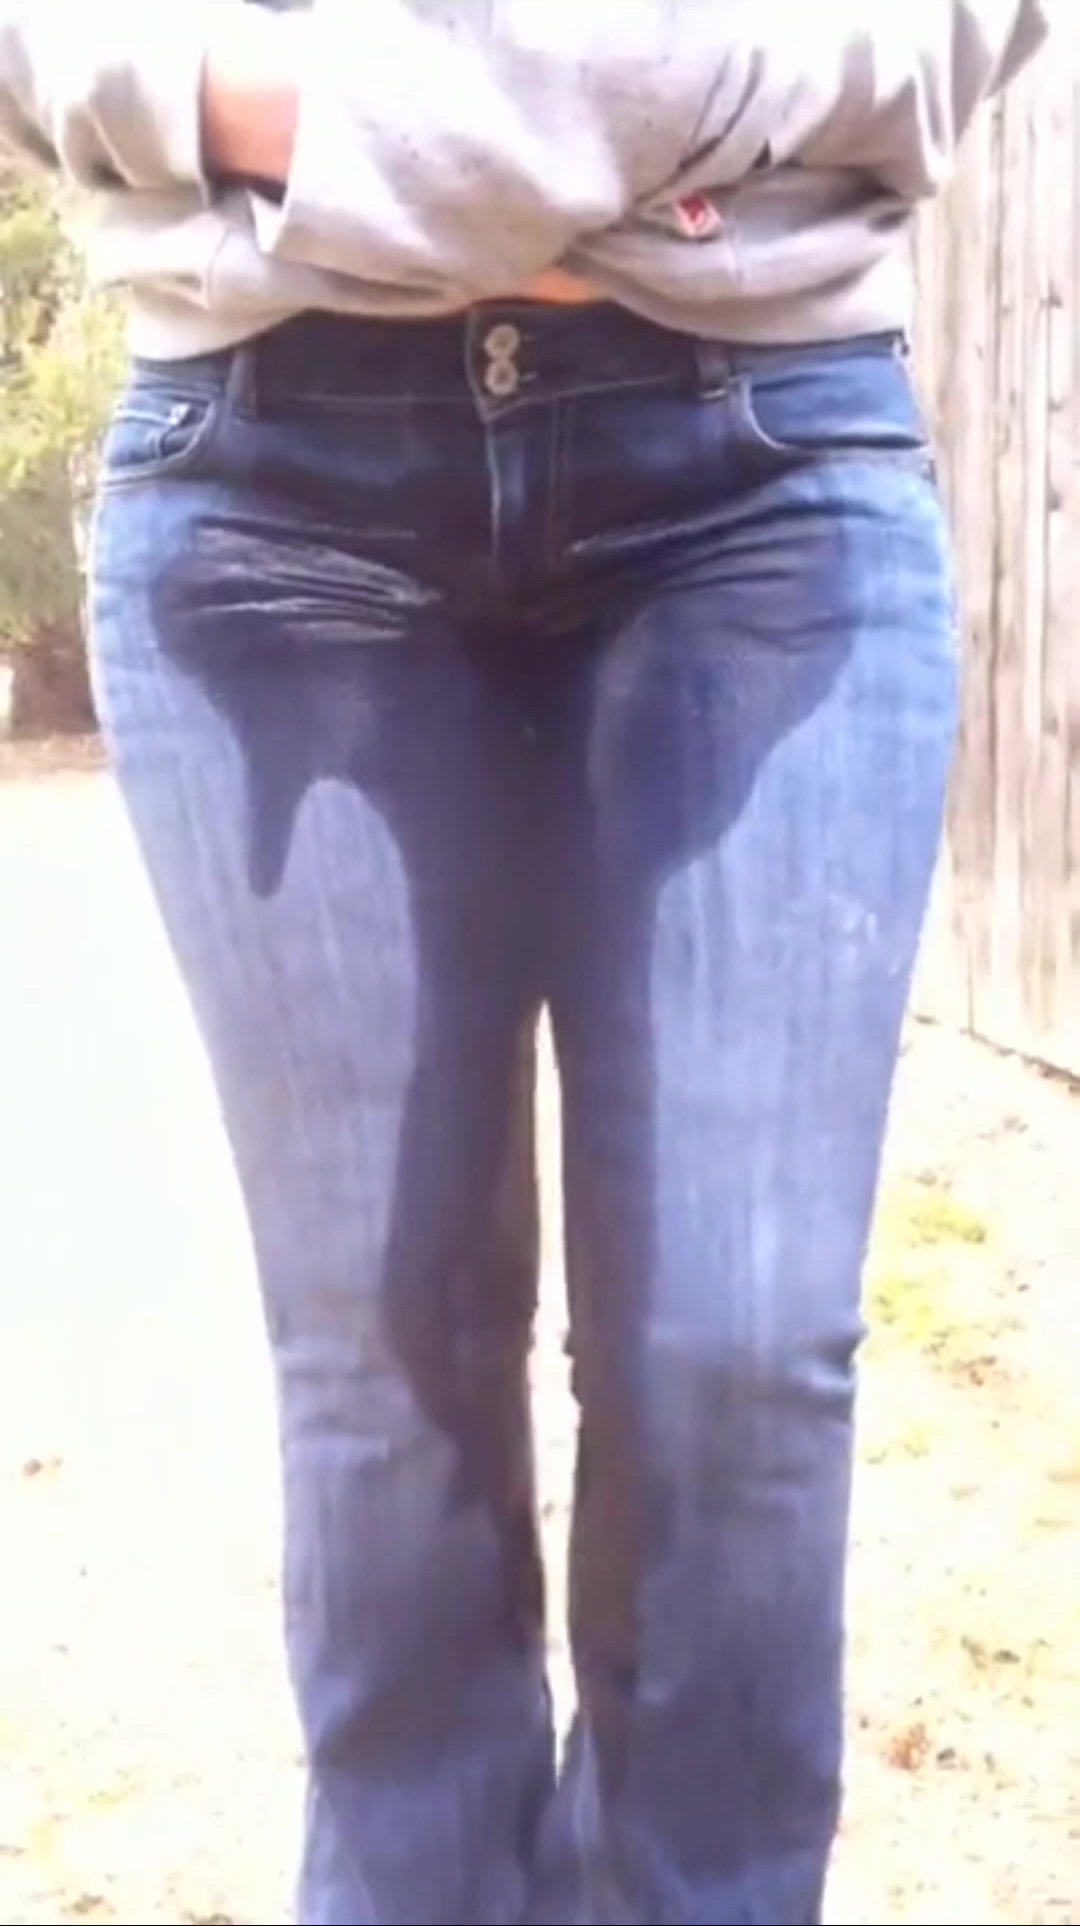 Pissing in jeans - video 5